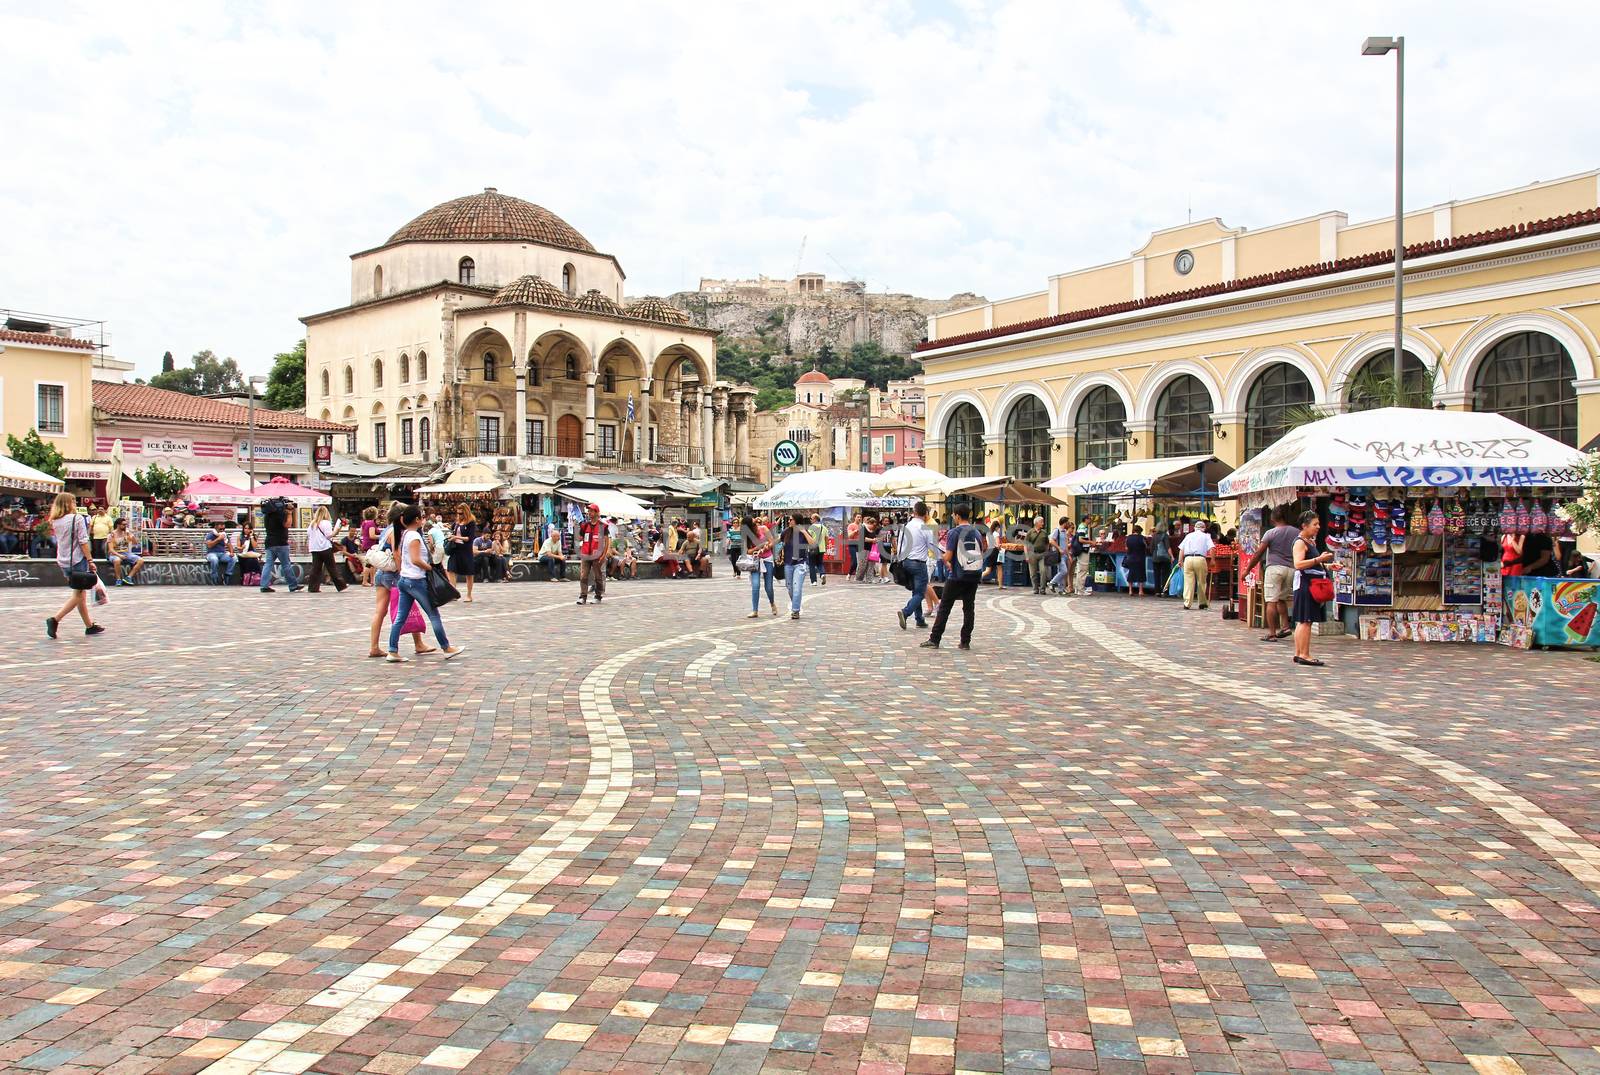 ATHENS, GREECE - MAY 19, 2015: Financial crisis in Greece. Athenians and tourists in Monastiraki Square, with market stalls, underground station on right, Tzistarakis Mosque on left and the Acropolis in the background.